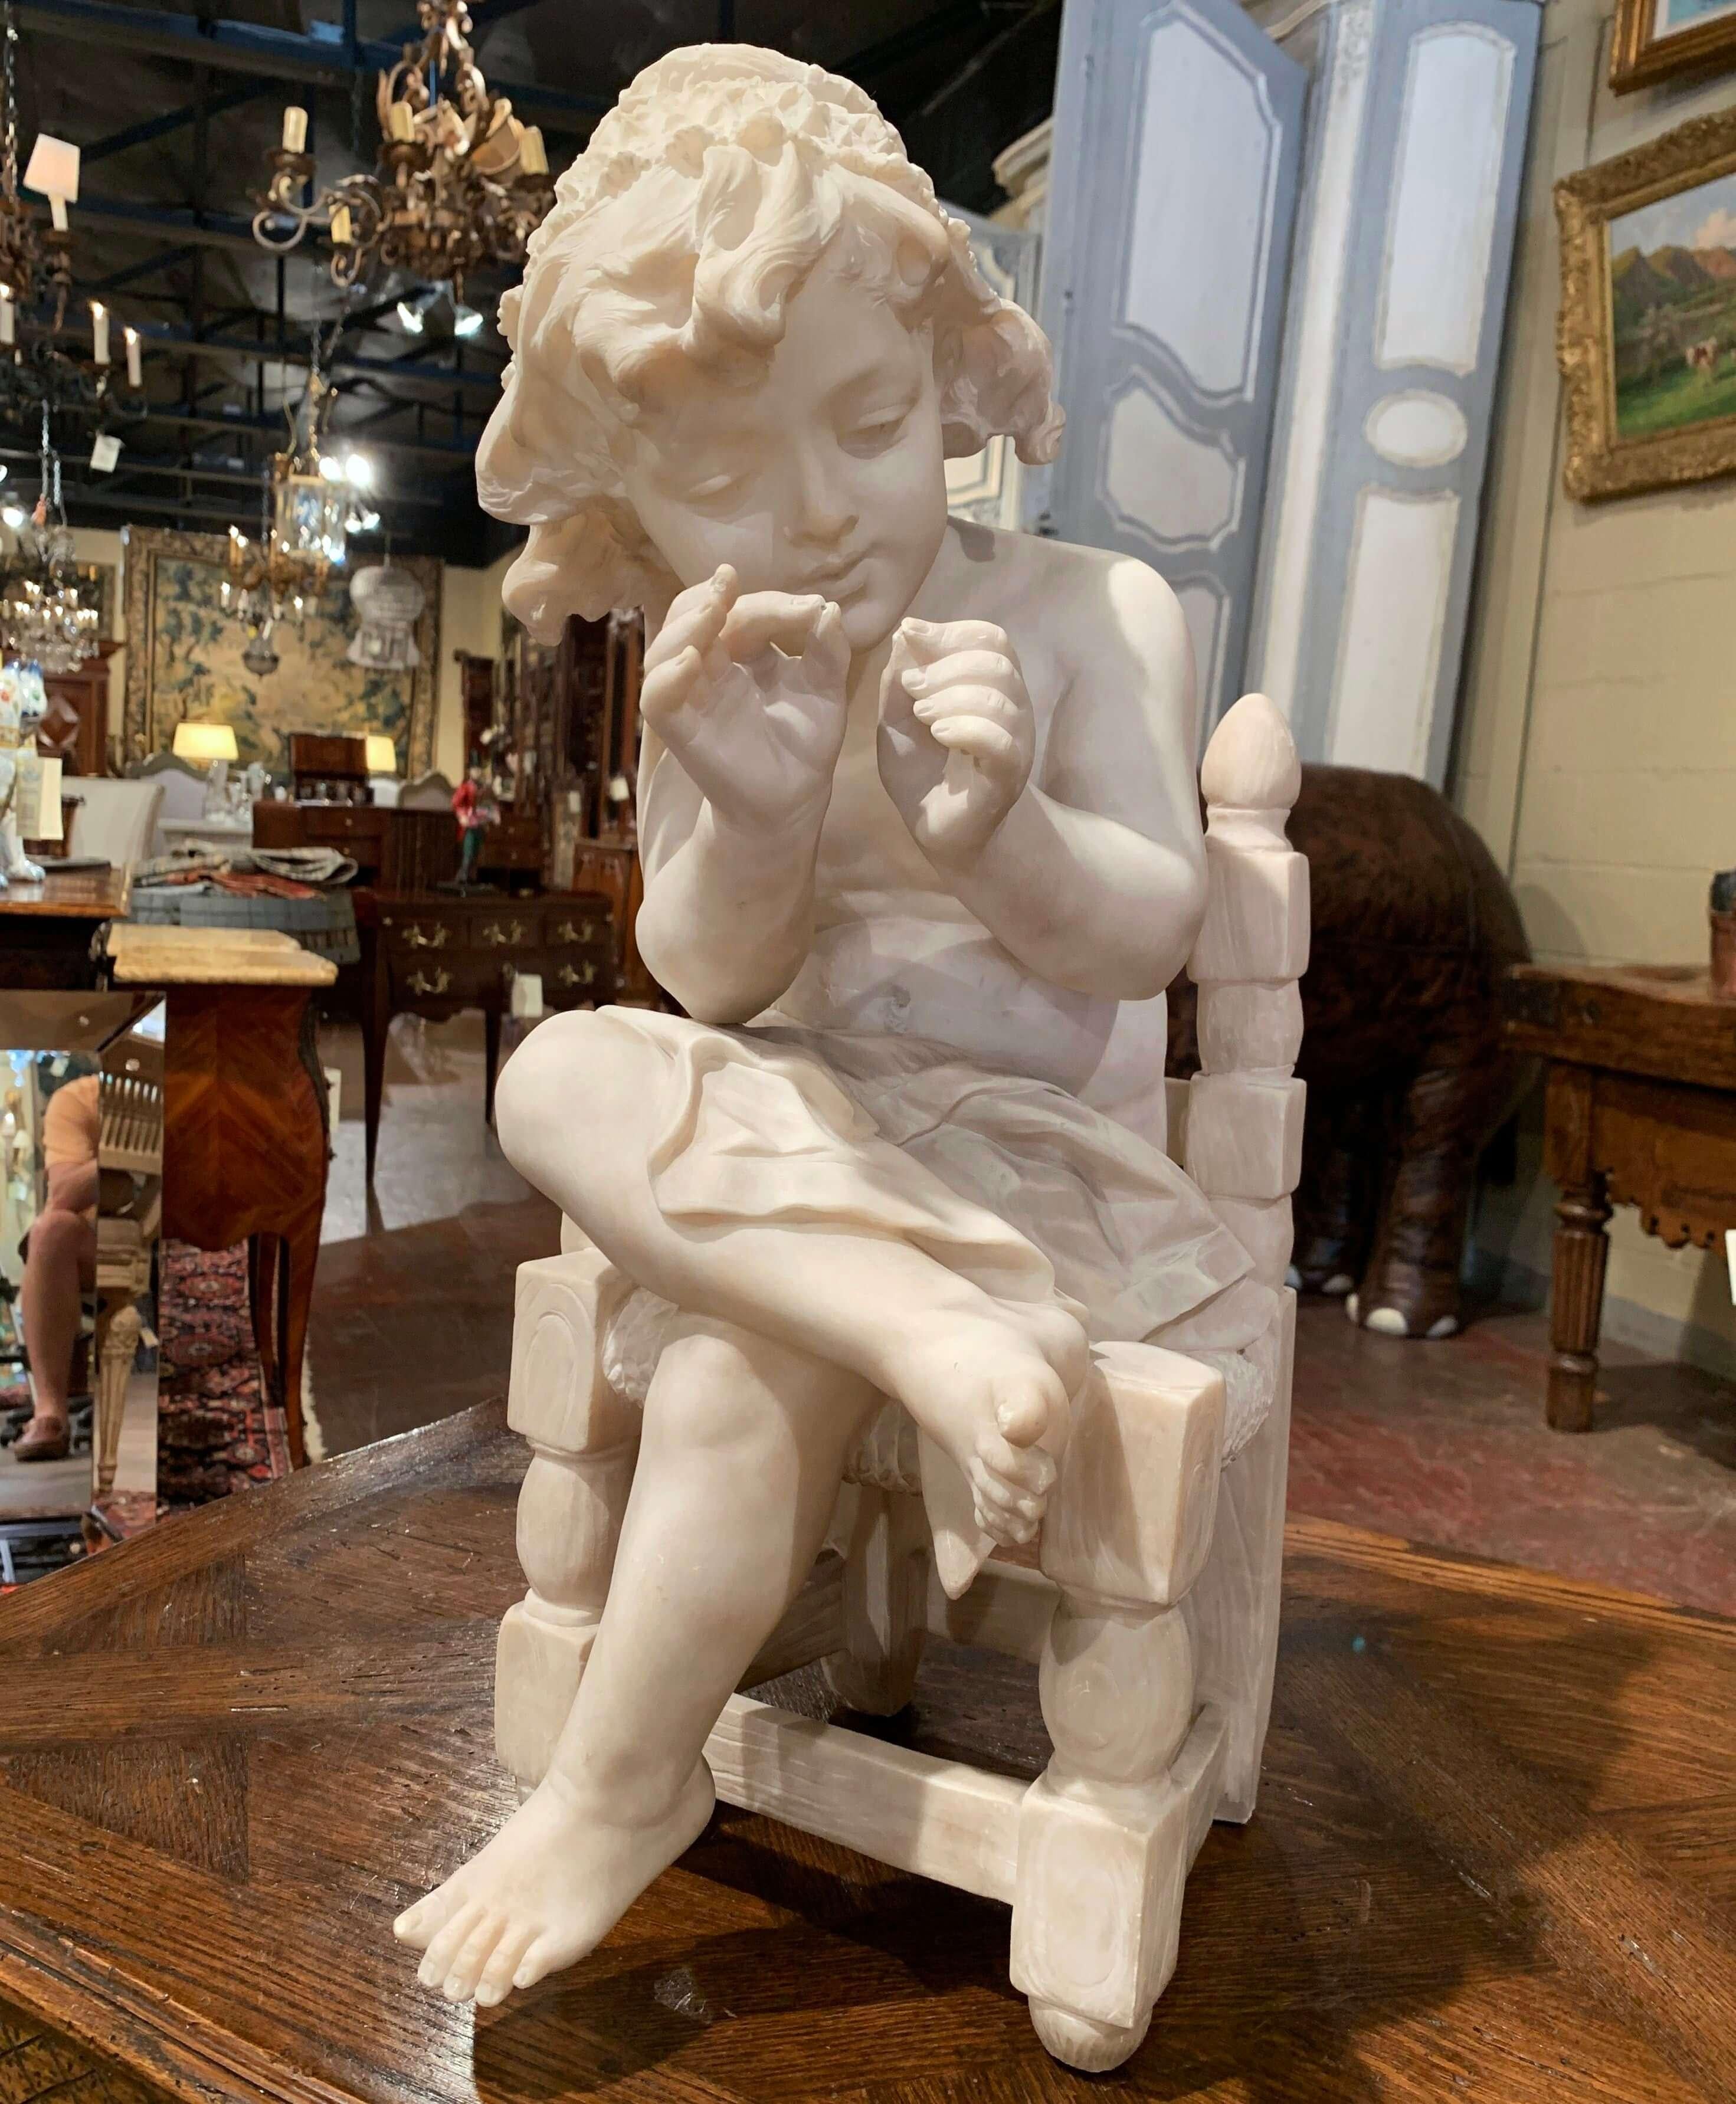 This antique carved marble composition was crafted in France, circa 1870. The sculpture features a young girl sited on a chair her legs crossed and playing with her fingers. The art work shows exquisite detailed craftsmanship; the chair's